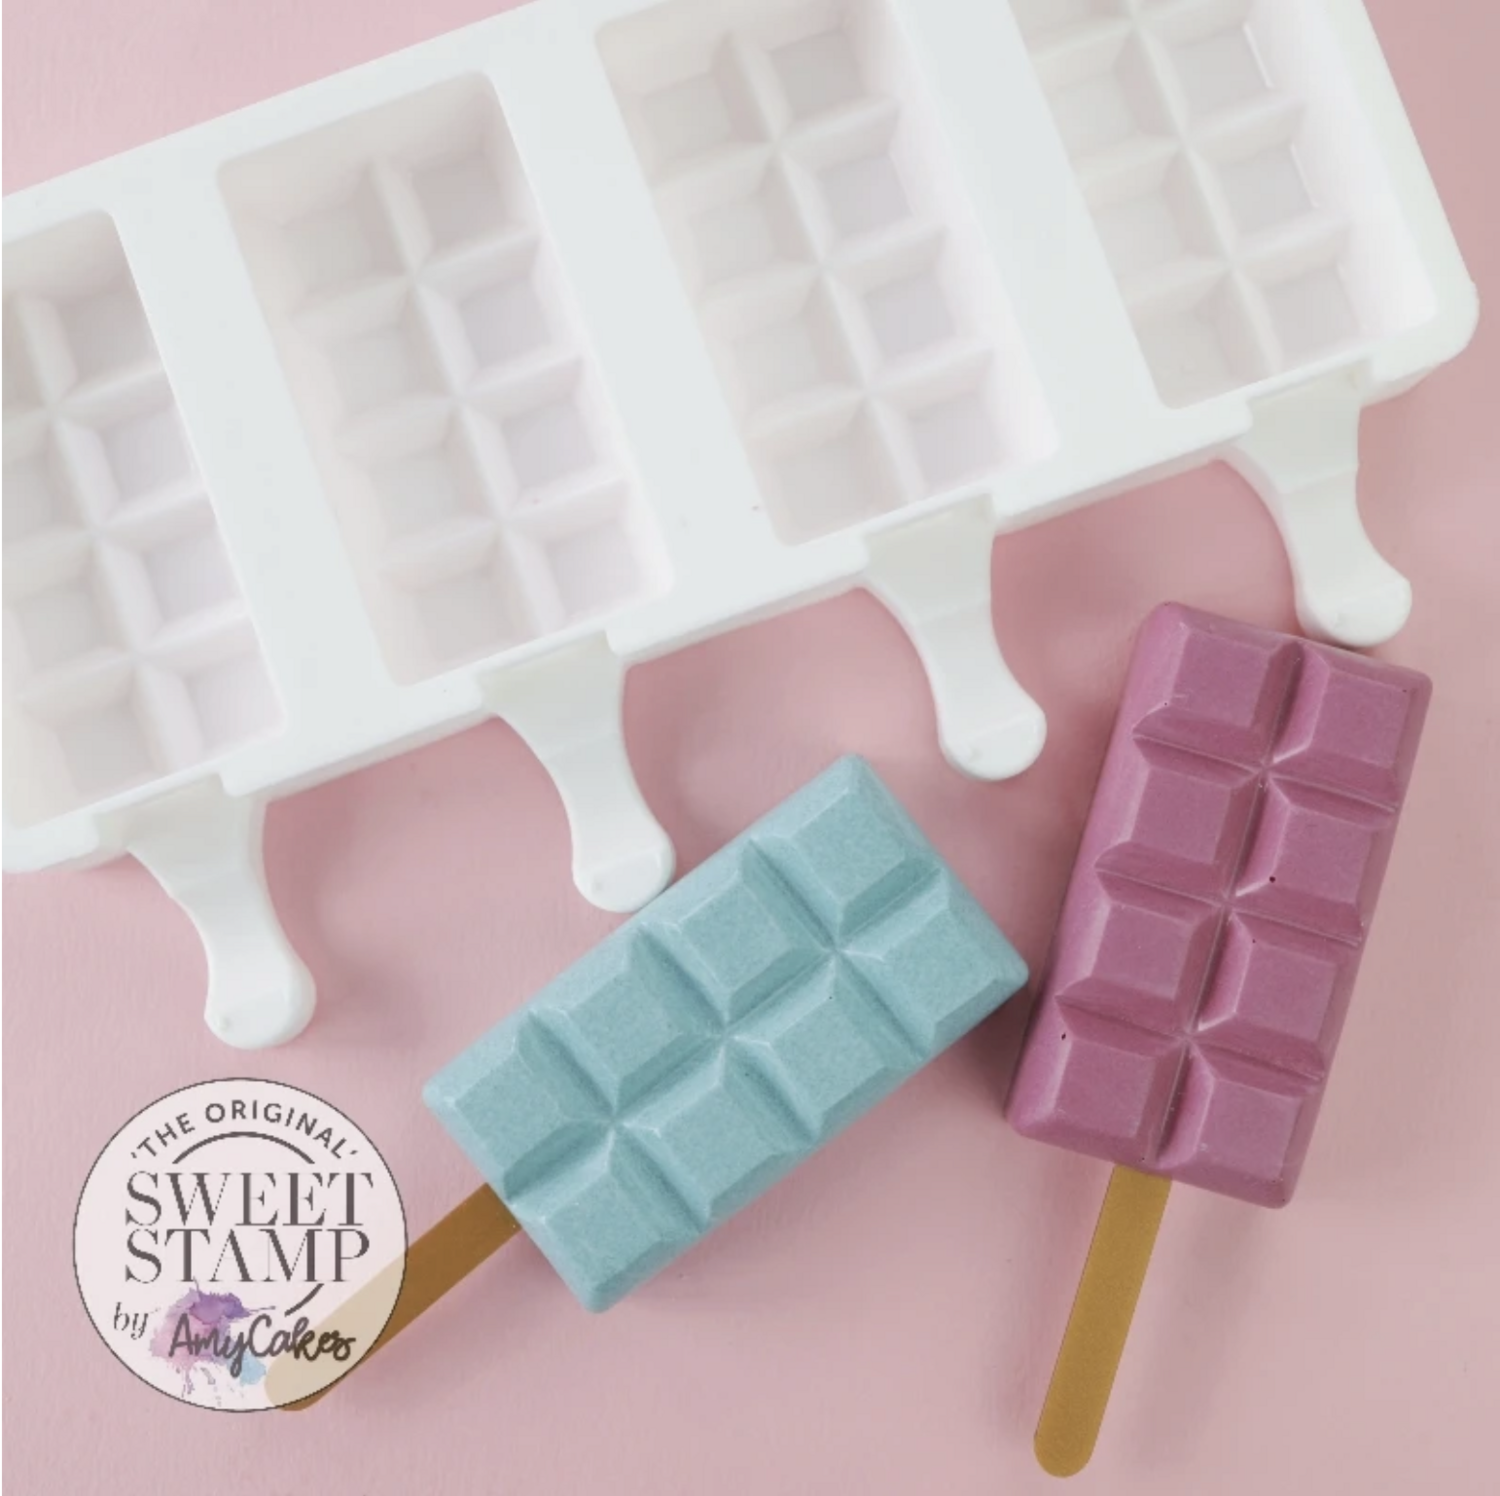 Sweet Stamp Cake Popsicle CHOC BAR Mould - Καλούπι για Popsicles & Cakesicles Μπάρα Σοκολάτας